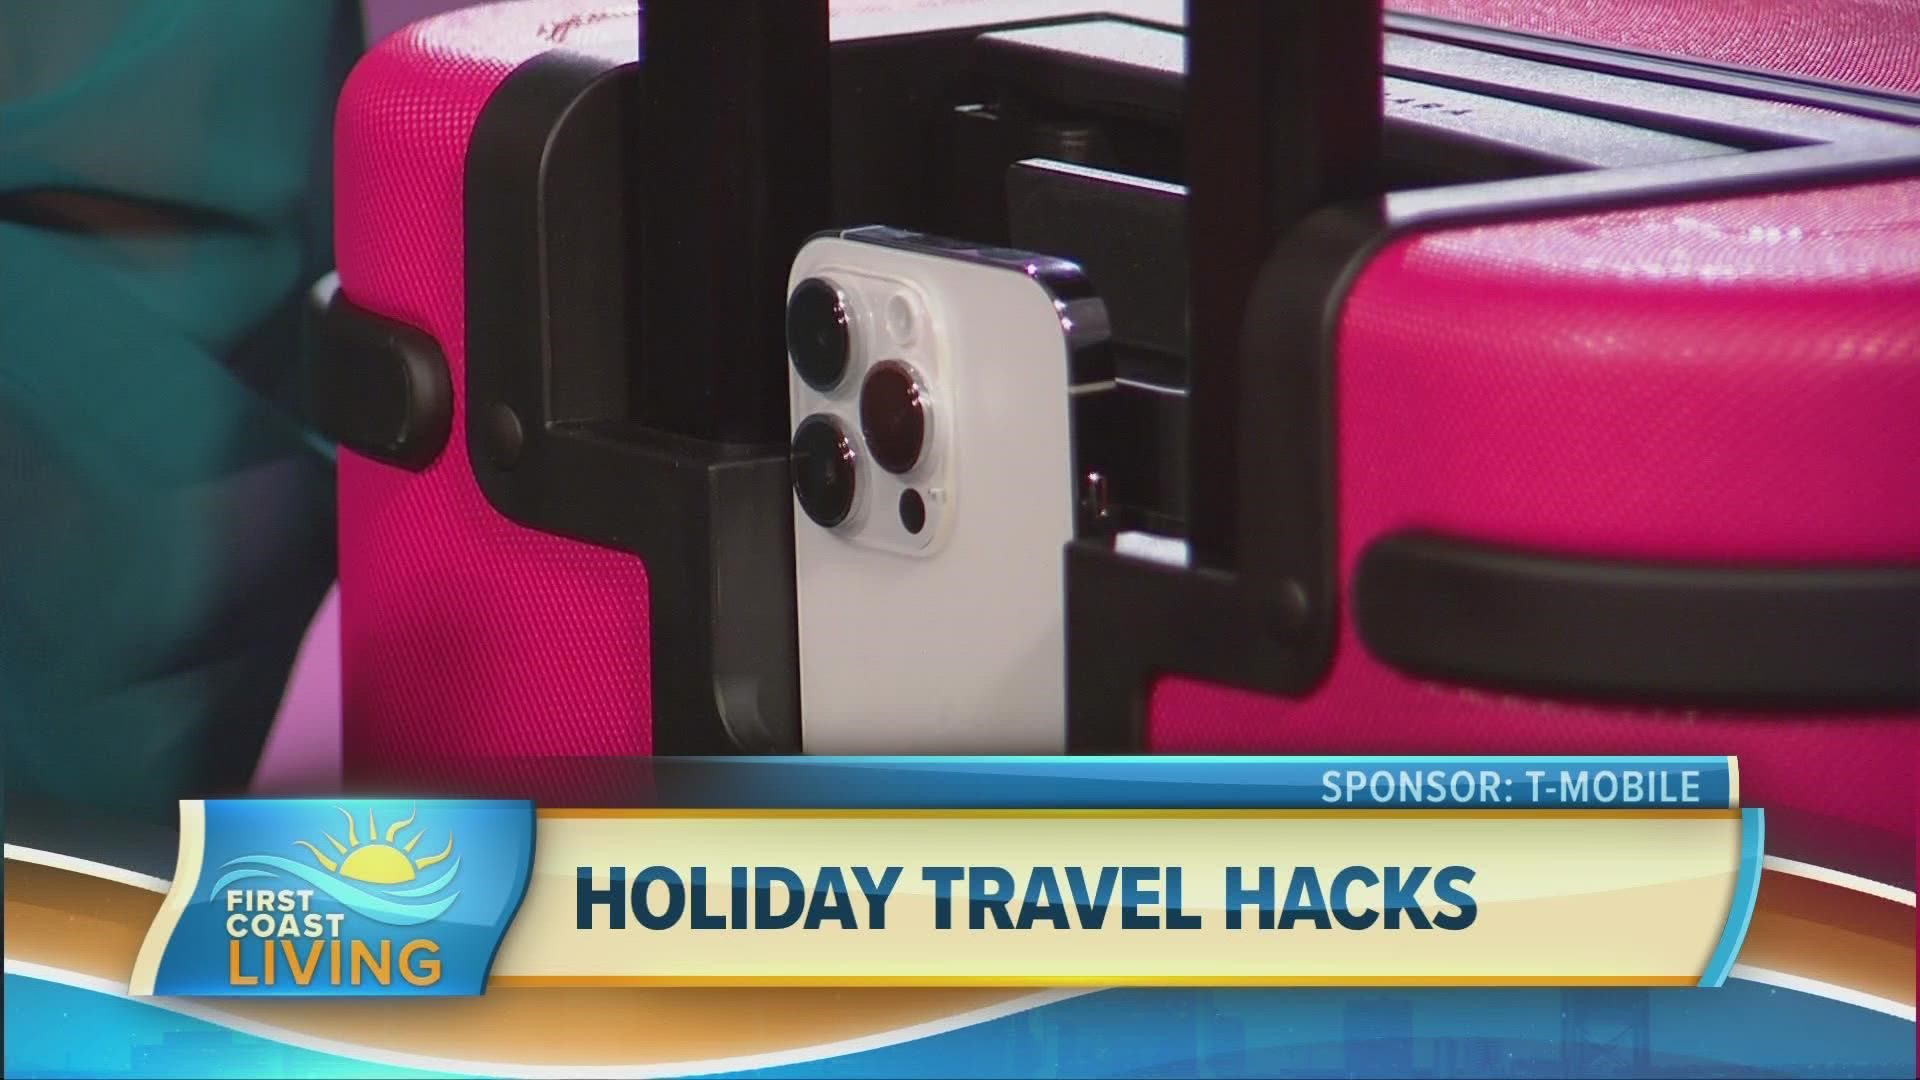 Travel Filmmaker and Host, Juliana Broste shares her top travel hacks ahead of the holidays.